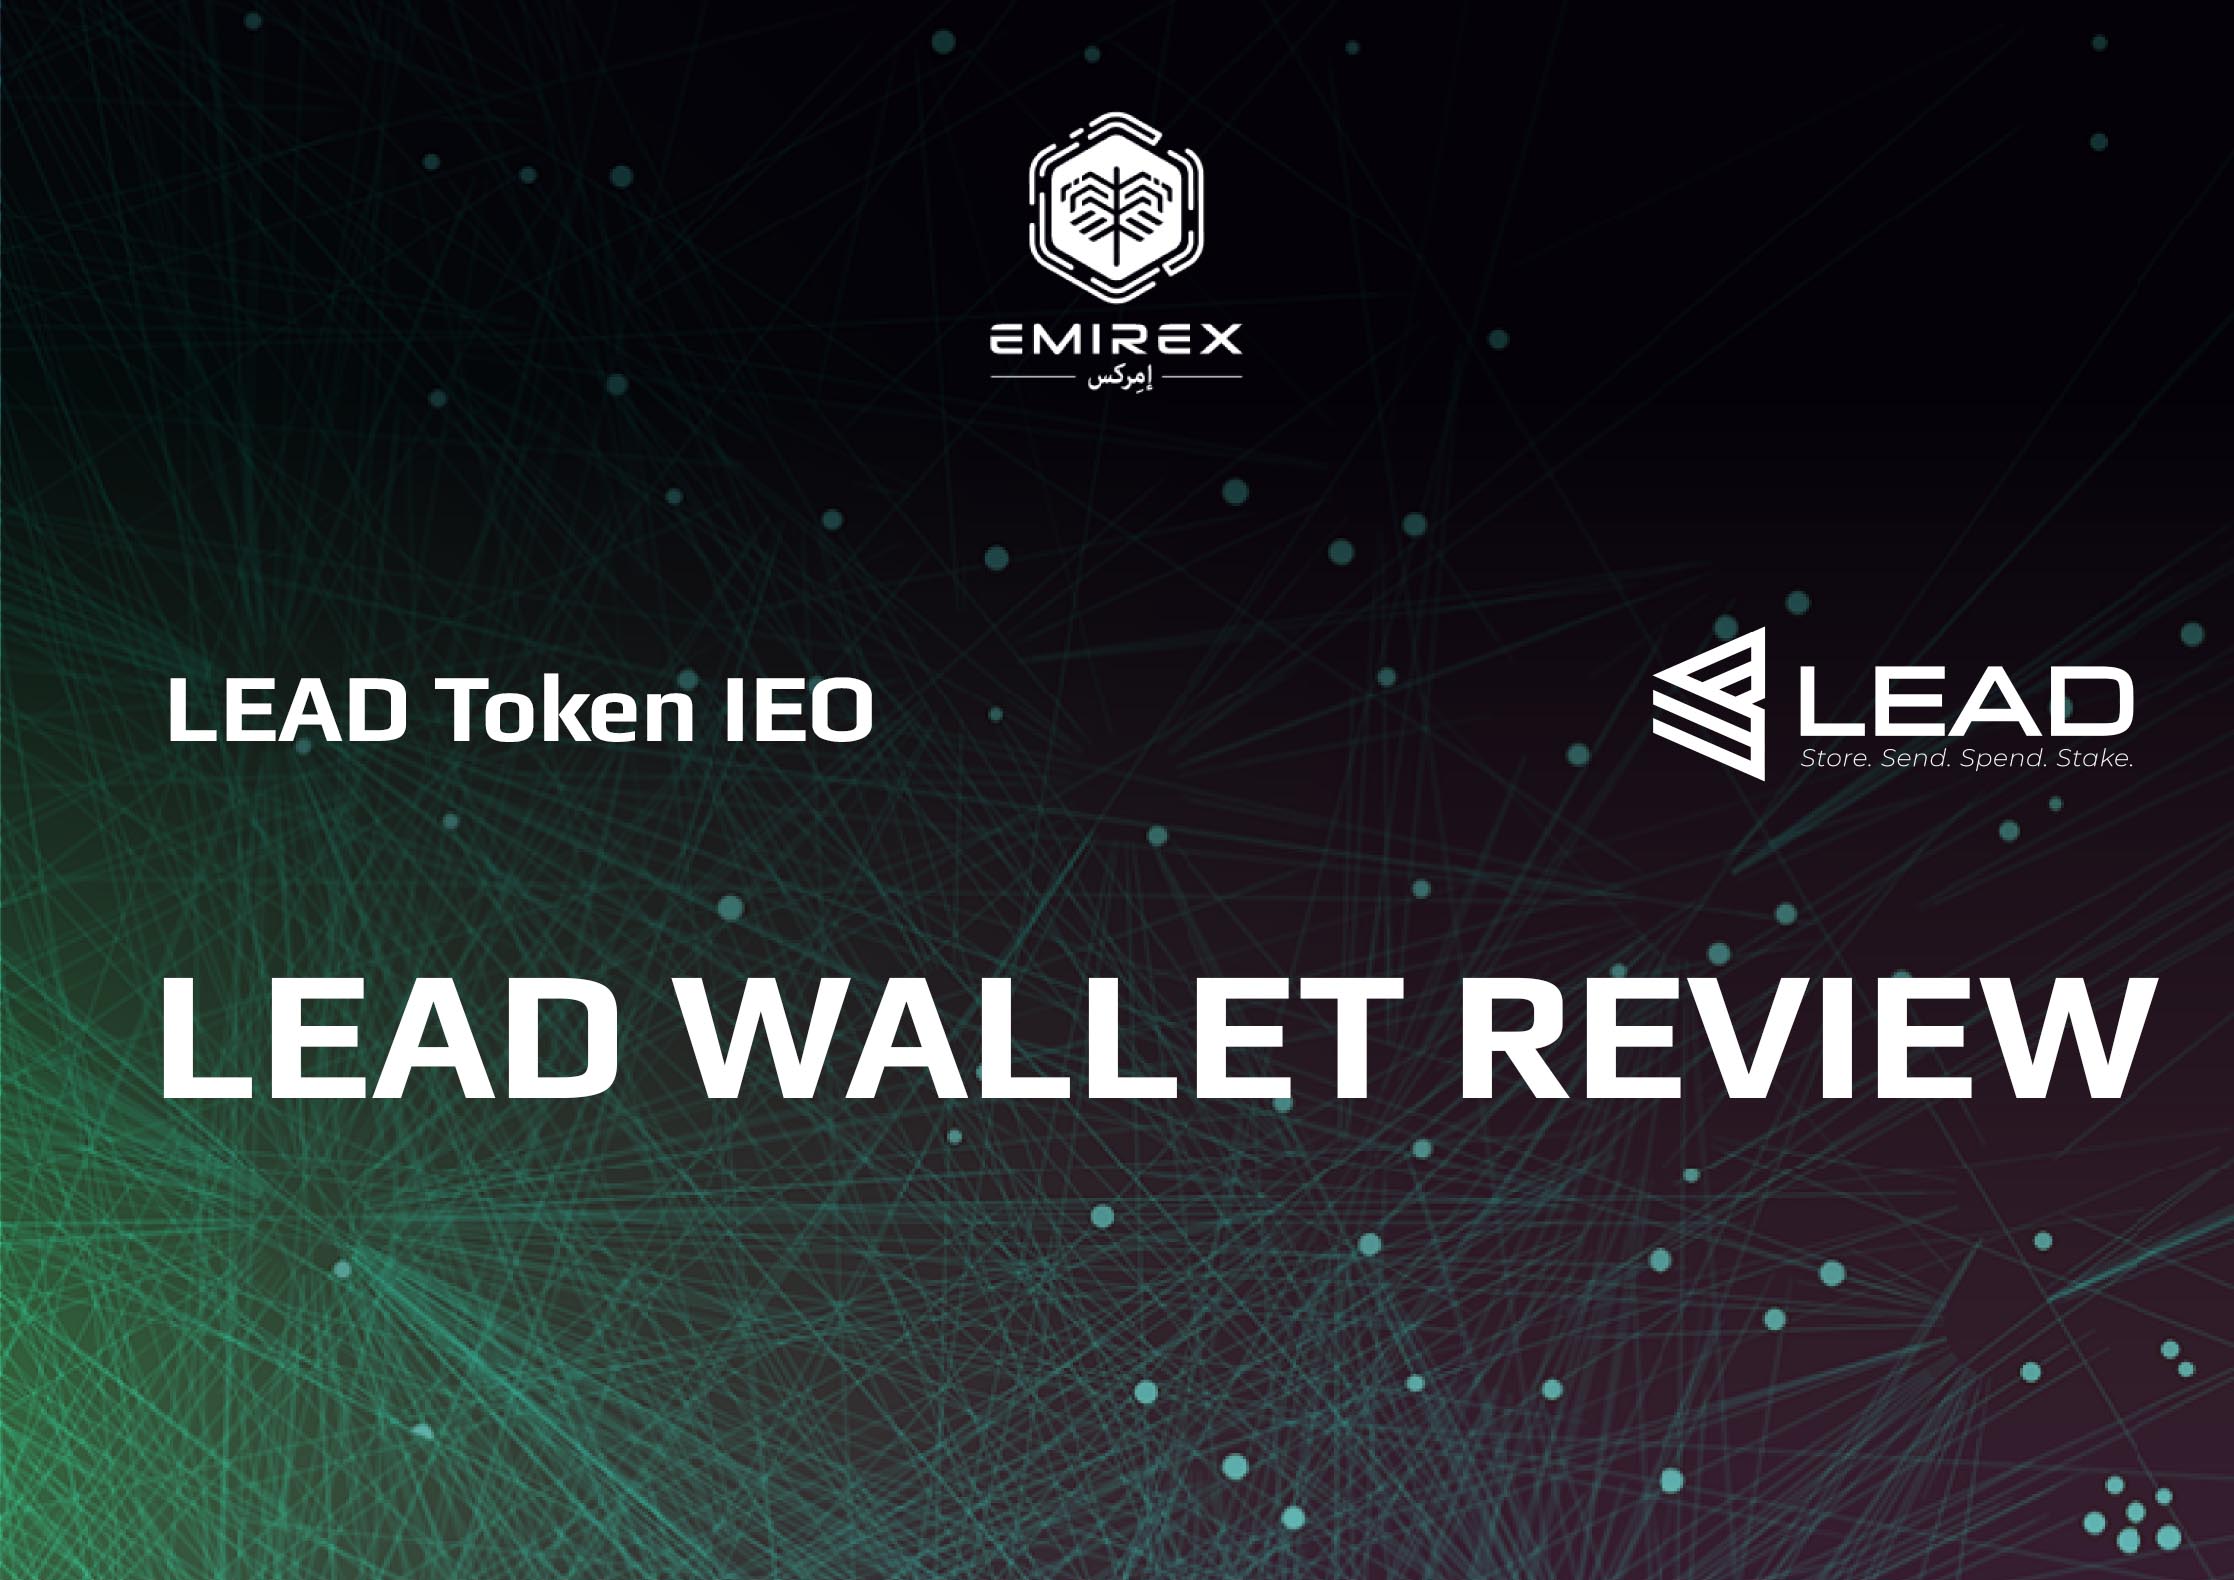 Lead Wallet Review 2020. Store, Spend, Exchange crypto